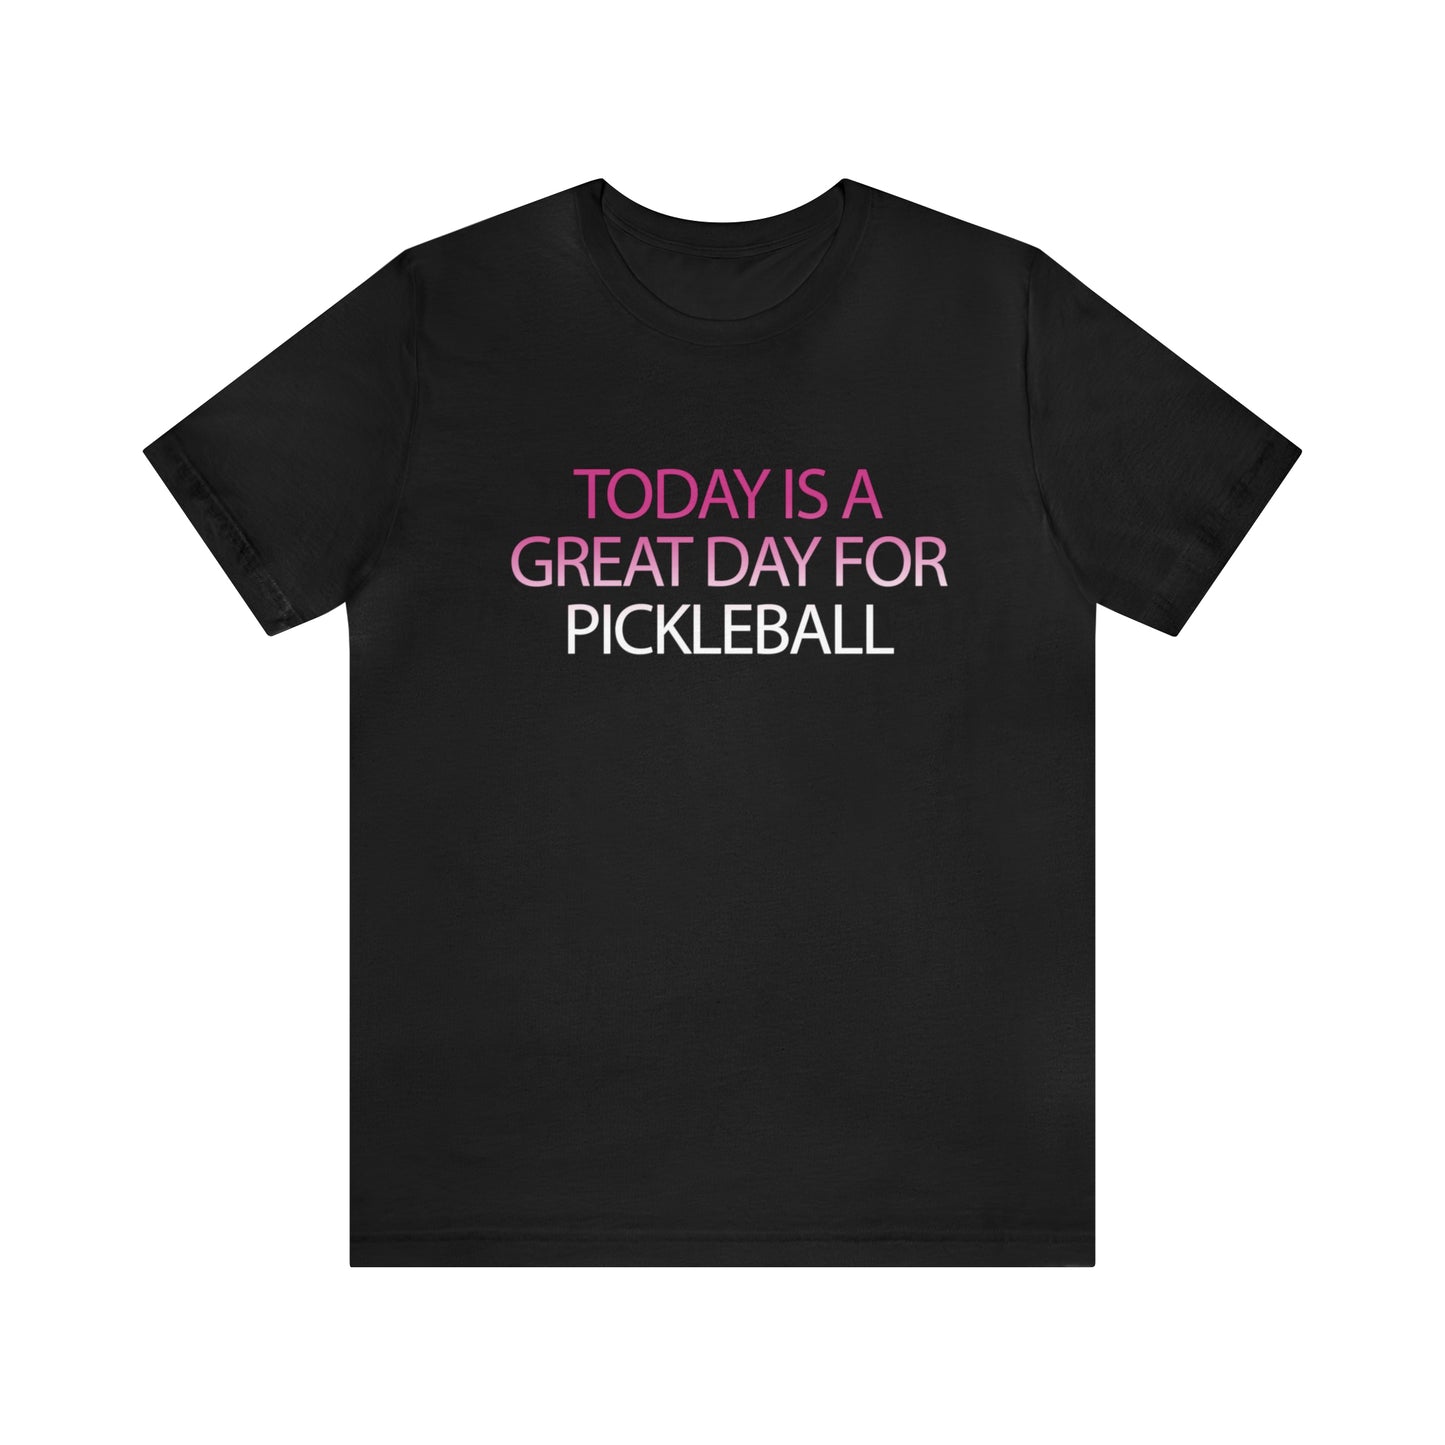 Today is a Great Day for Pickleball - Enthusiast Unisex T-Shirt